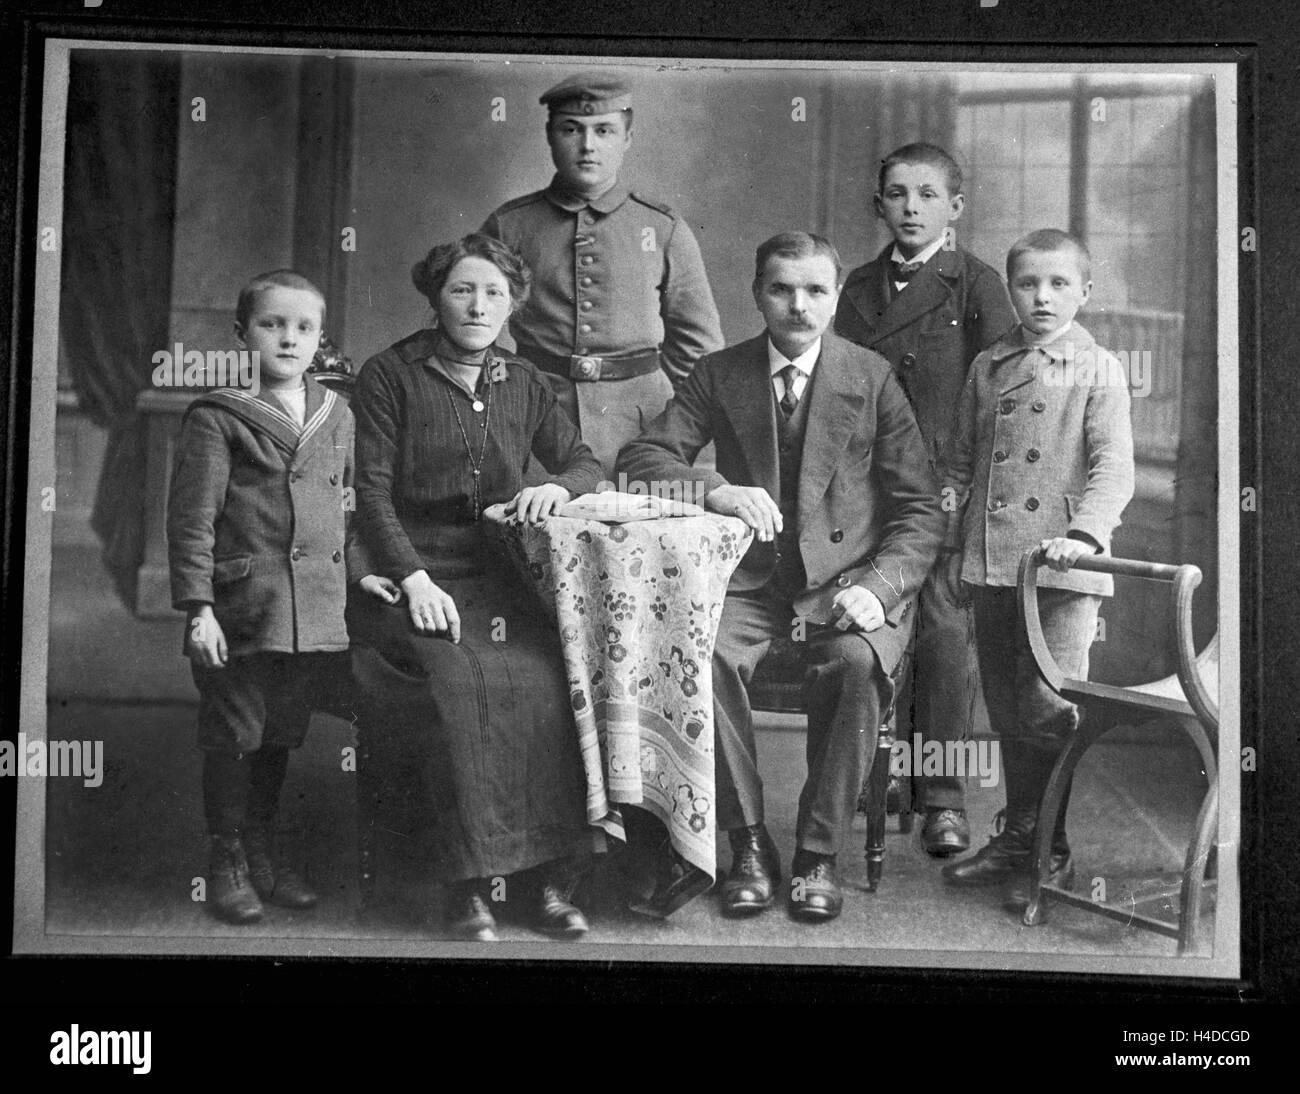 Reproduktion eines Fotos: Familienfoto aus den 1910er Jahren, Deutschland 1930er Jahre. Reproduction of a photograph: family from the 1910s, Germany 1930s. Stock Photo